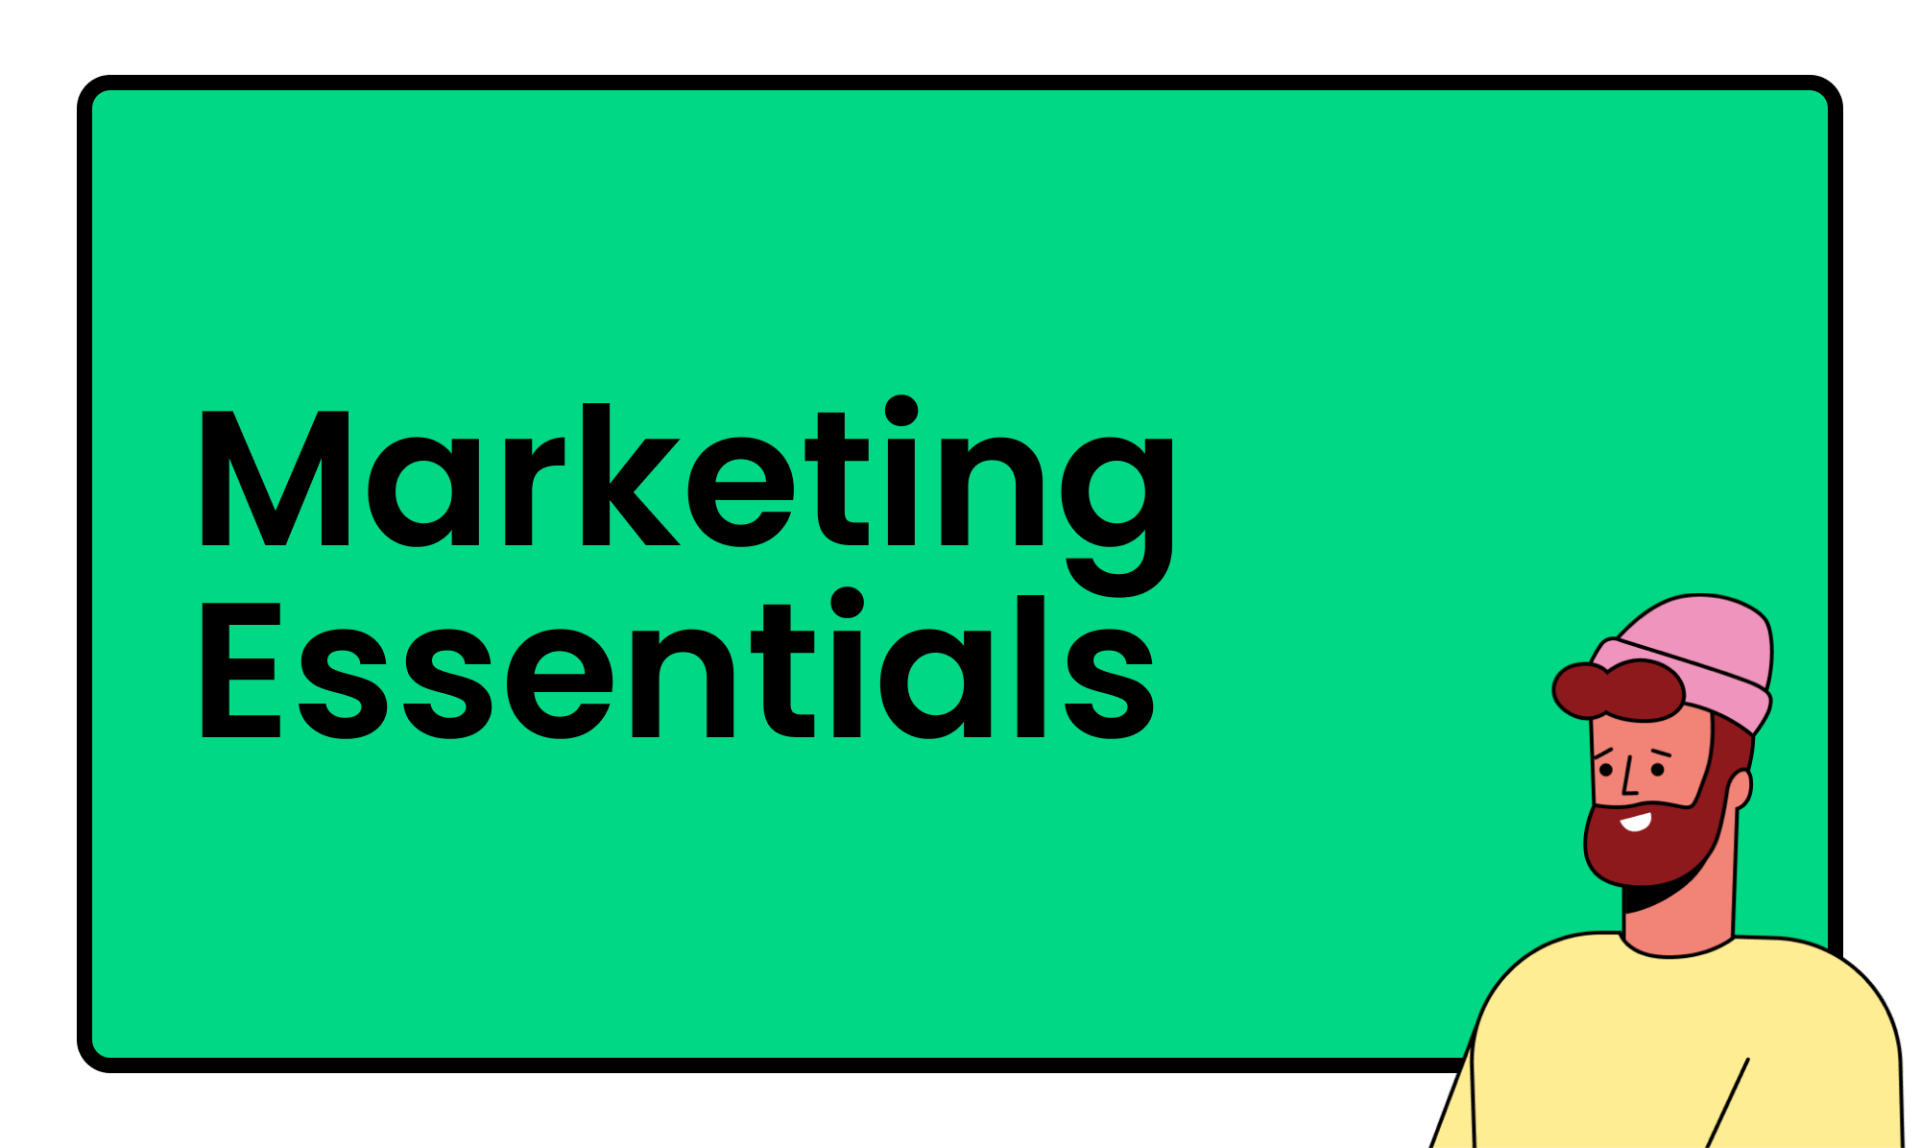 The essential marketing activities for any business to grow.